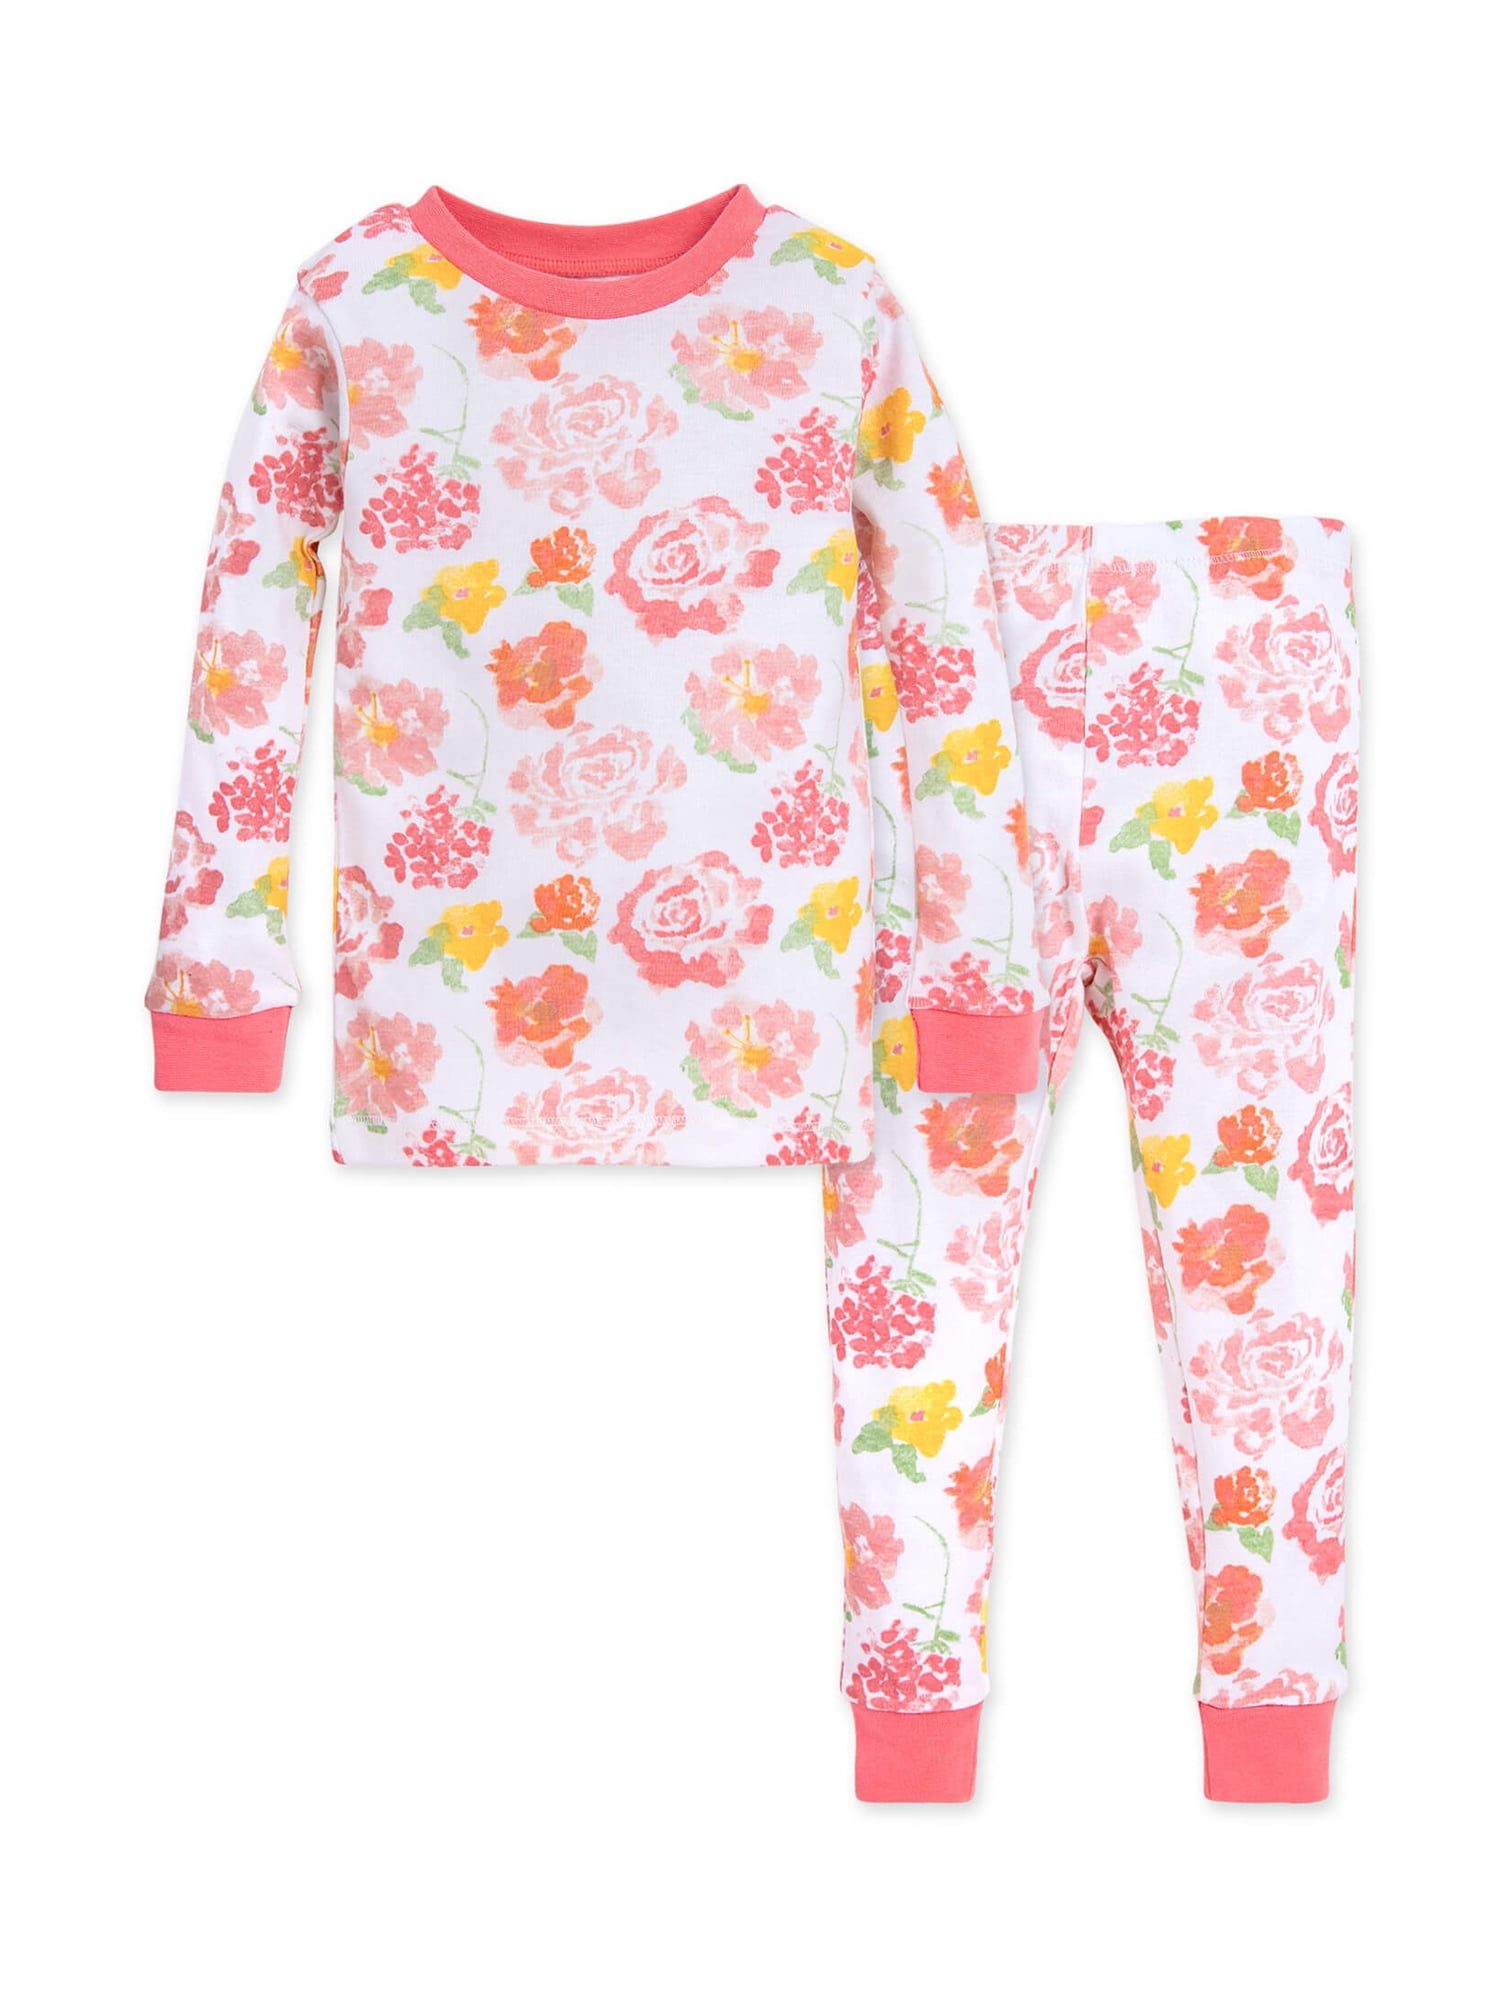 Girls Mothercare TWO PACK Bear  Pyjamas Ages 6-9M,9-12M,12-18M Gorgeous!